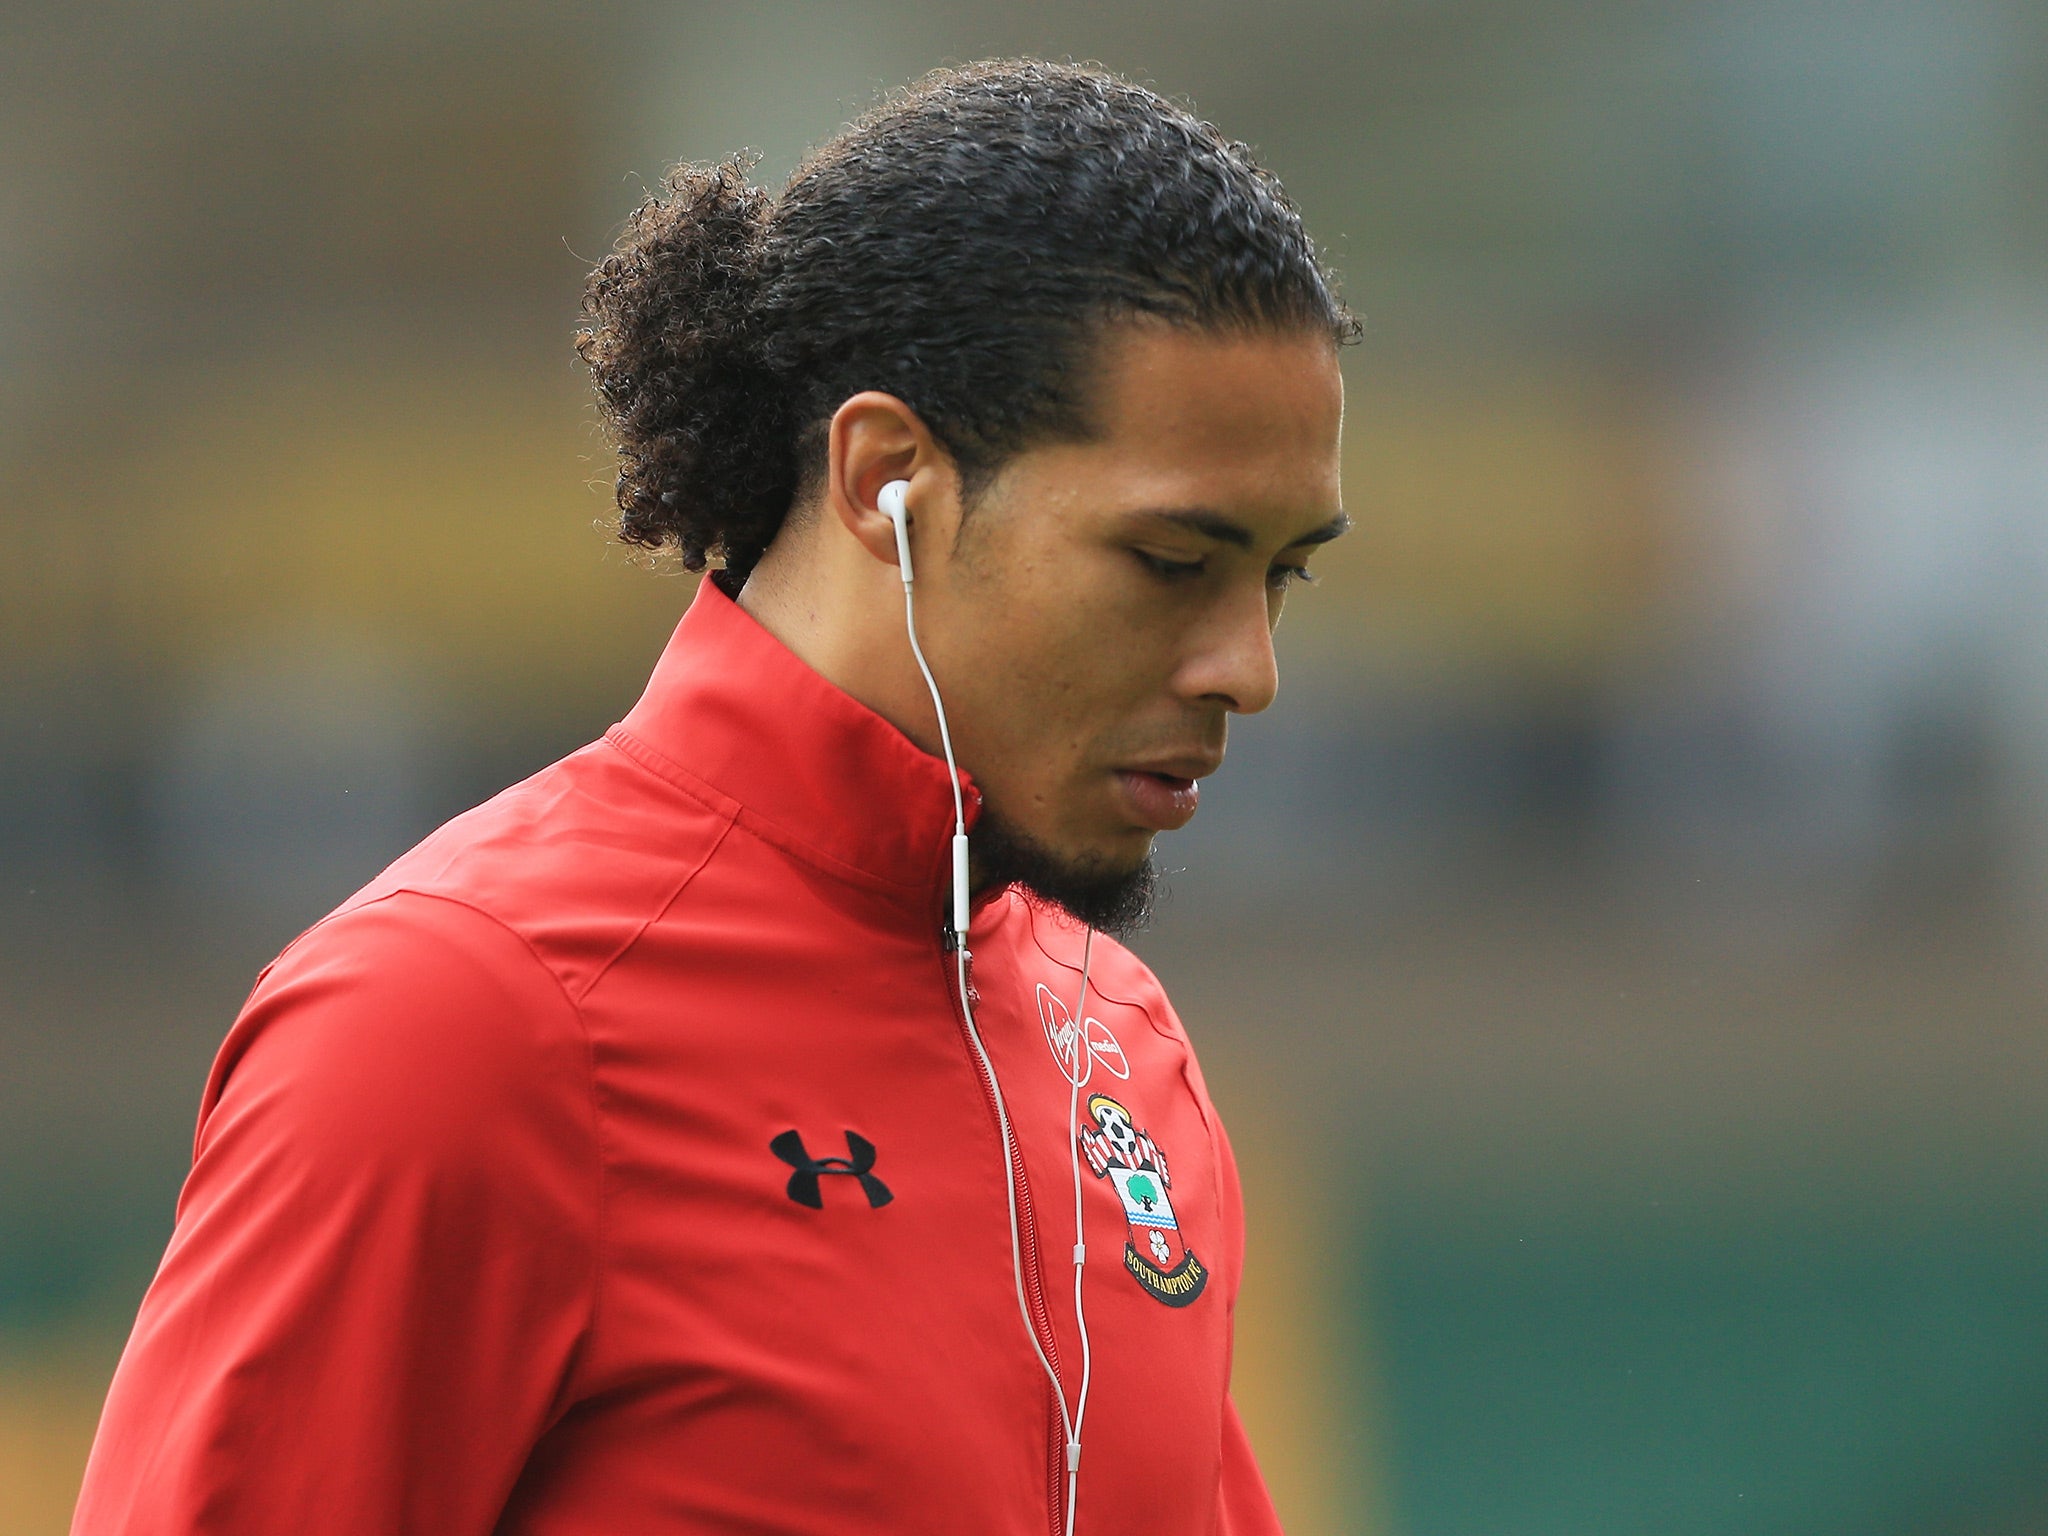 Liverpool confirmed on Wednesday that they had ended their interest in Virgil van Dijk